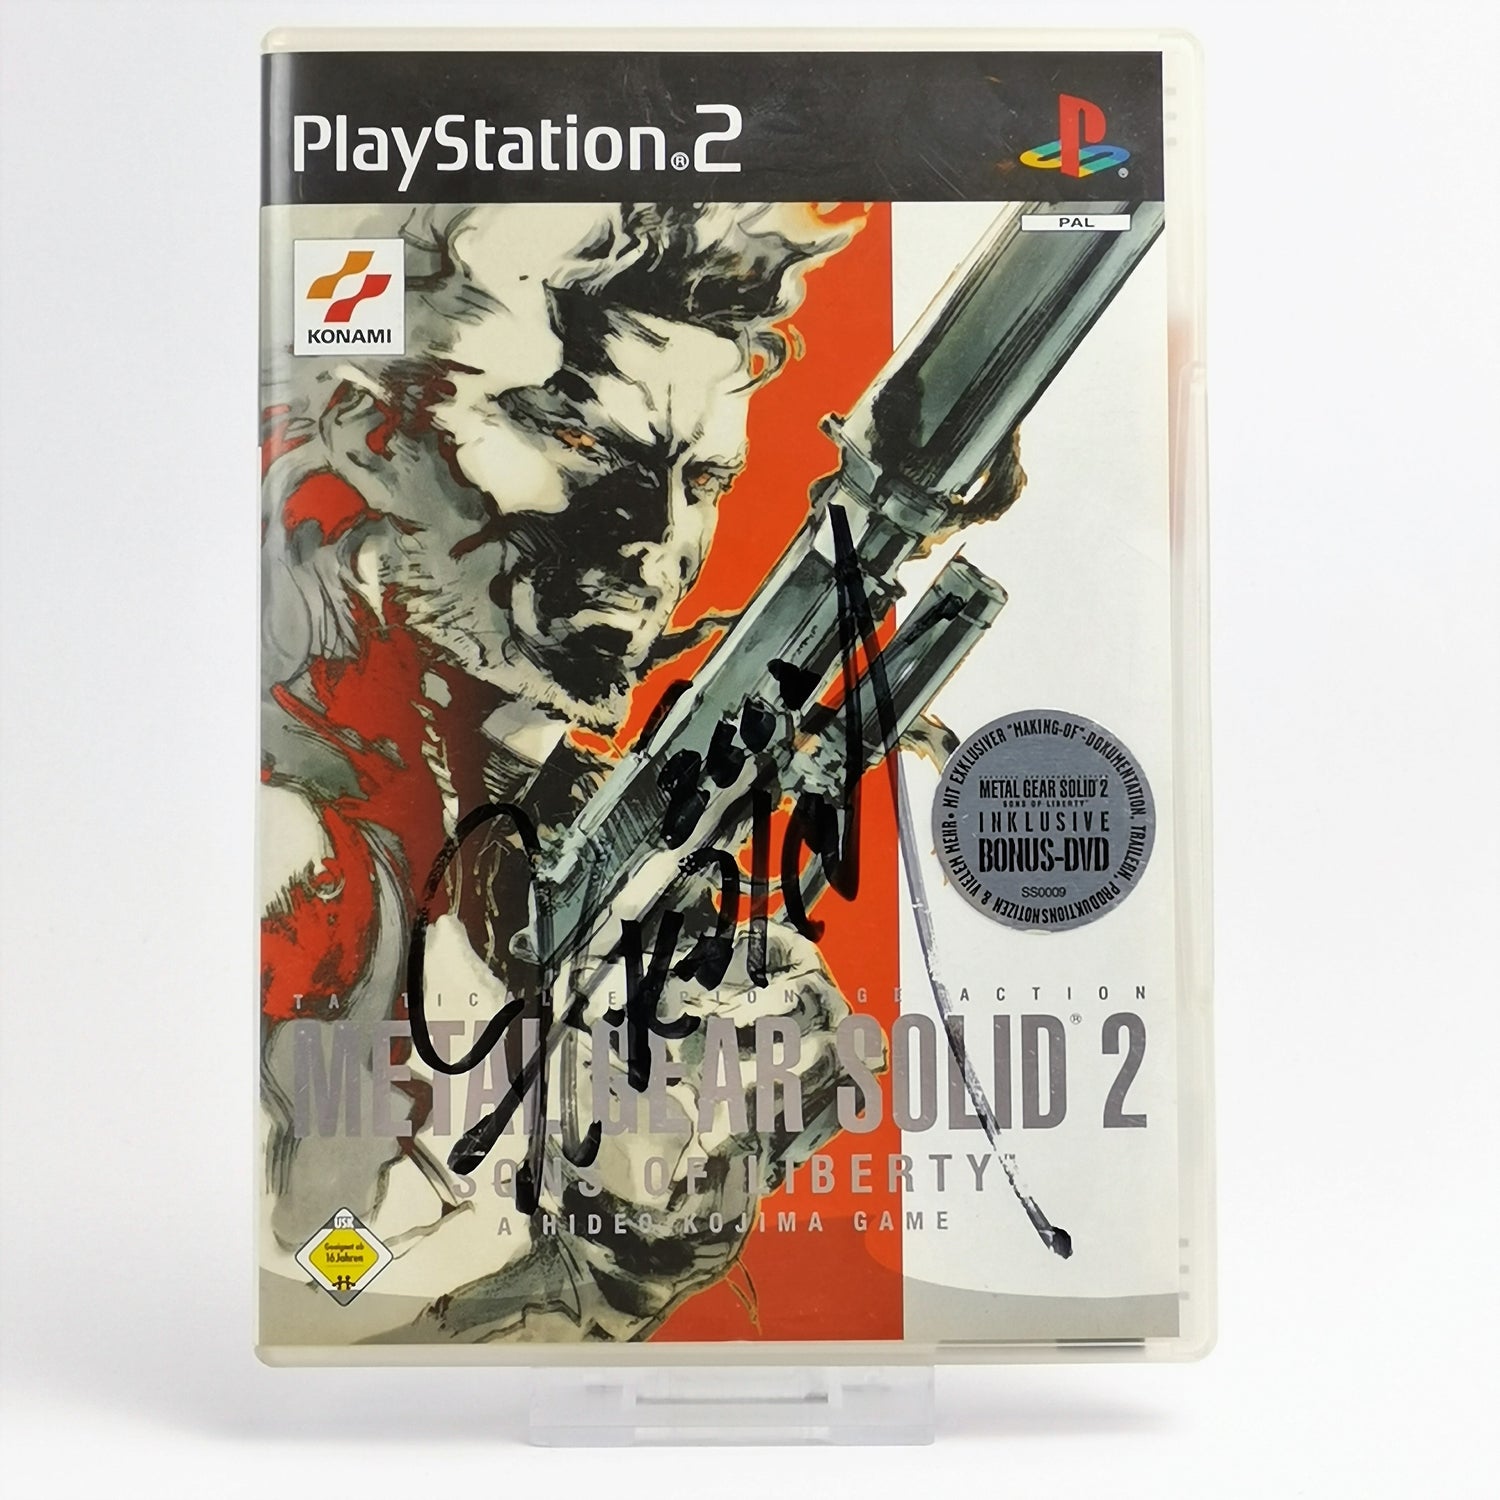 Sony Playstation 2: Metal Gear Solid 2 signed by Hideo Kojima - PS2